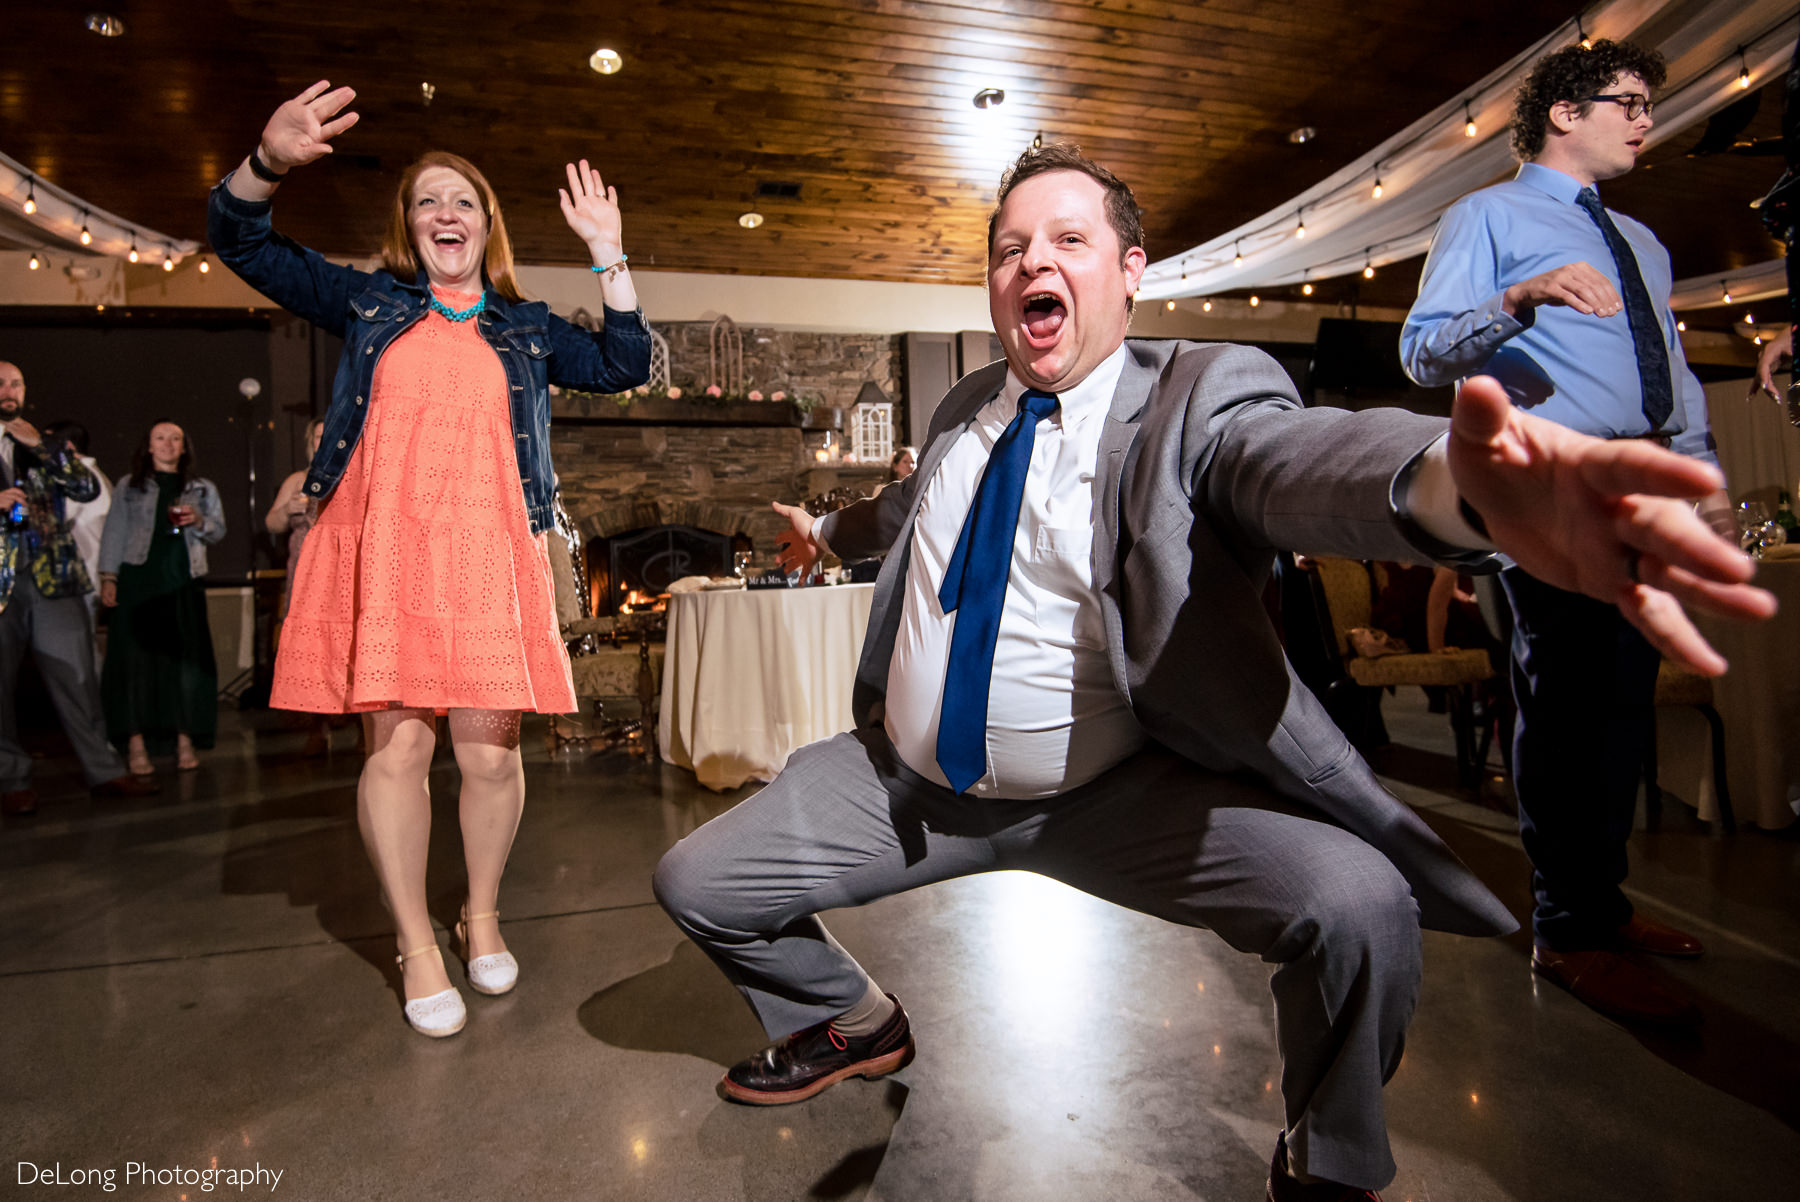 Up close image of man dancing low on the dancing floor during reception at Childress Vineyards by Charlotte Wedding Photographers DeLong Photography